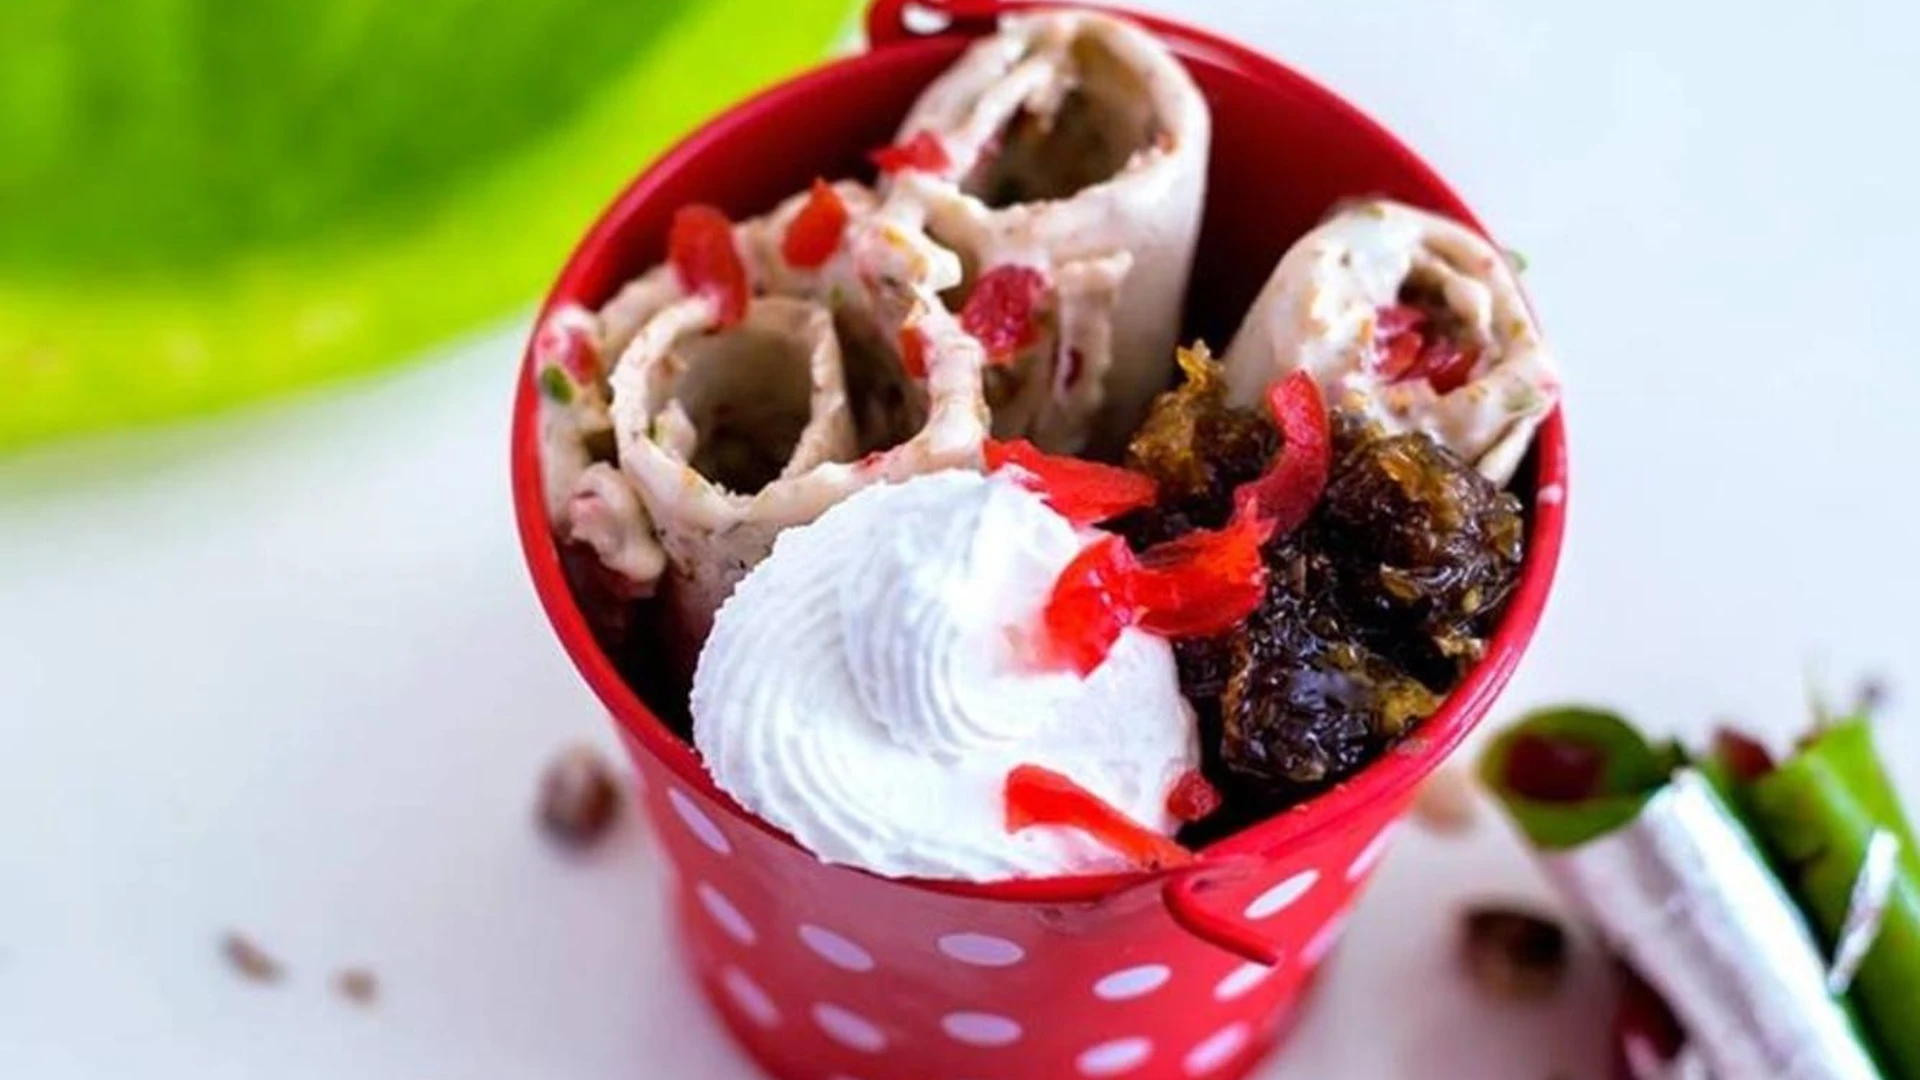 Try Rolled Ice-Cream At These 5 Famous Spots In Bangalore!